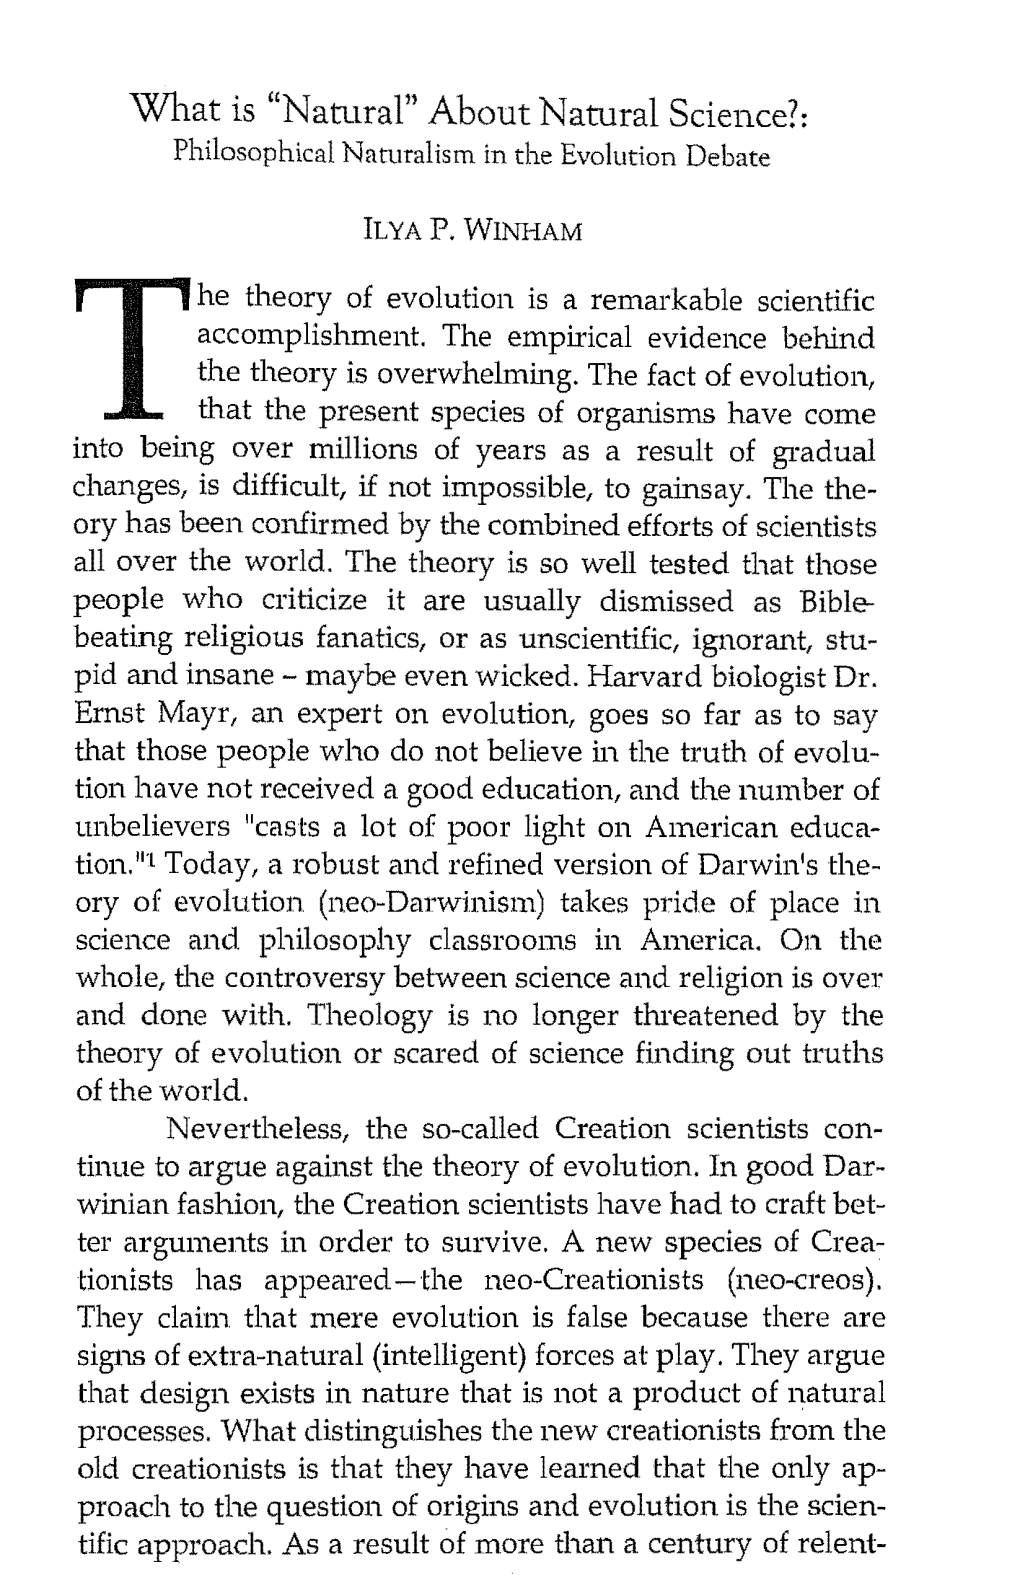 What Is 'Natural' About Natural Science: Philosophical Naturalism in the Evolution Debate